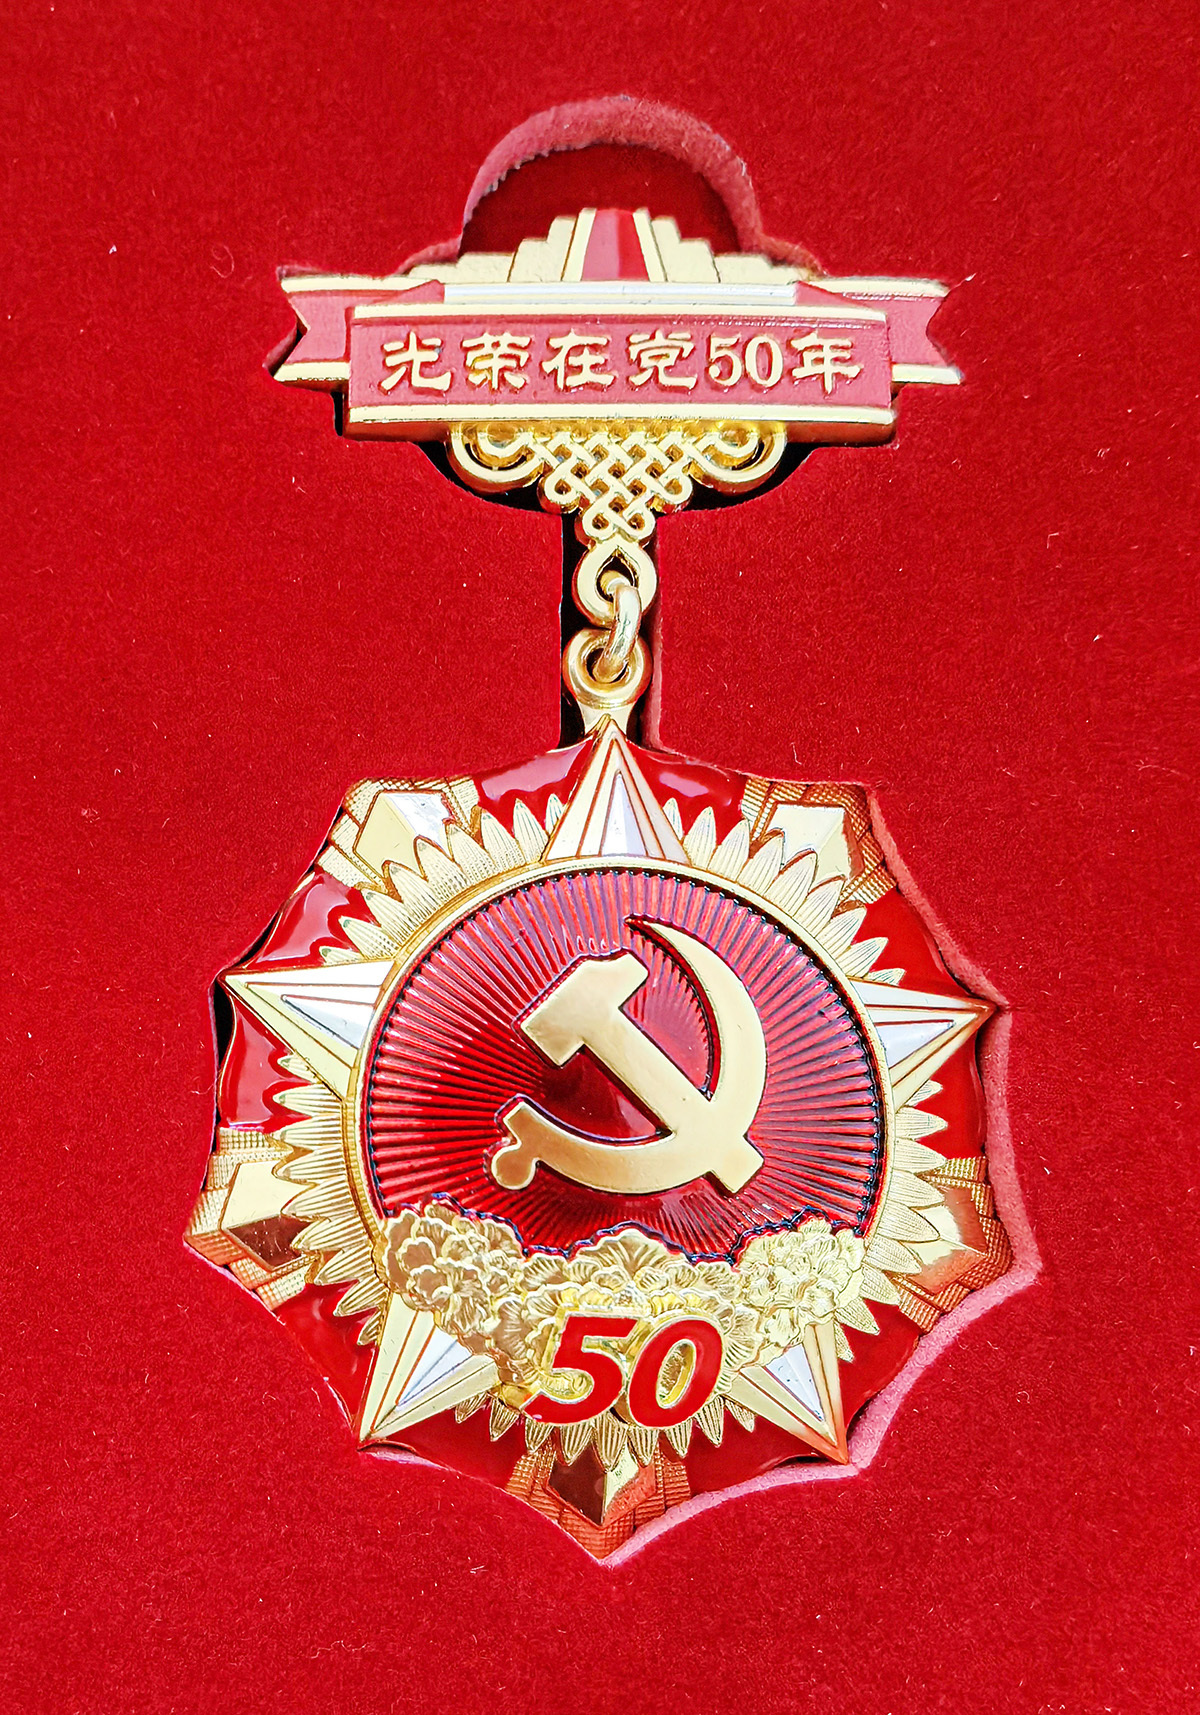 A series of activities of Party Building: Celebrating July 1 - the 50th anniversary of the glory of the party